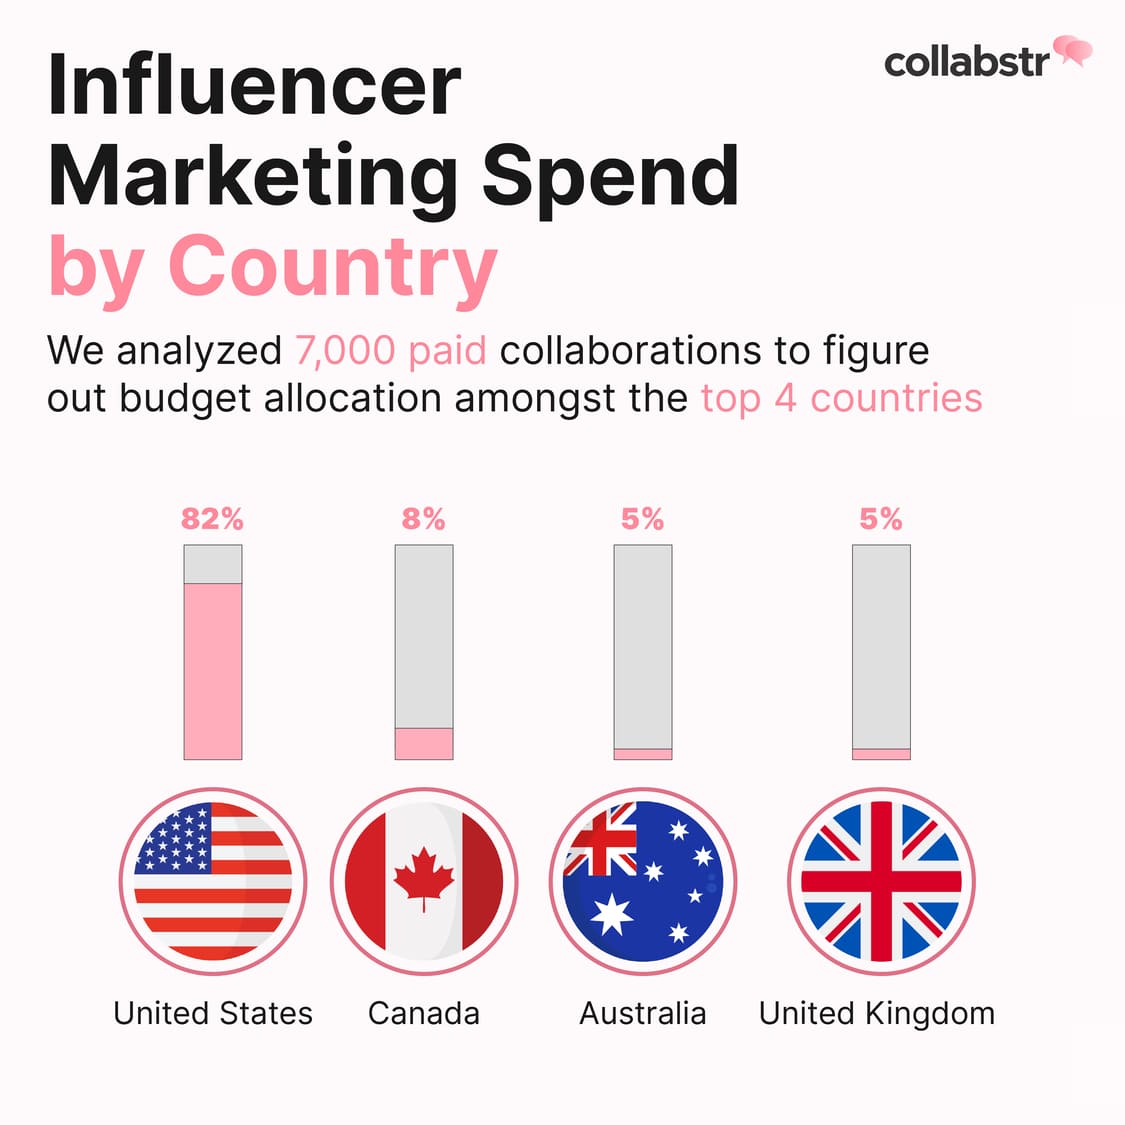 Influencer marketing spend by country.